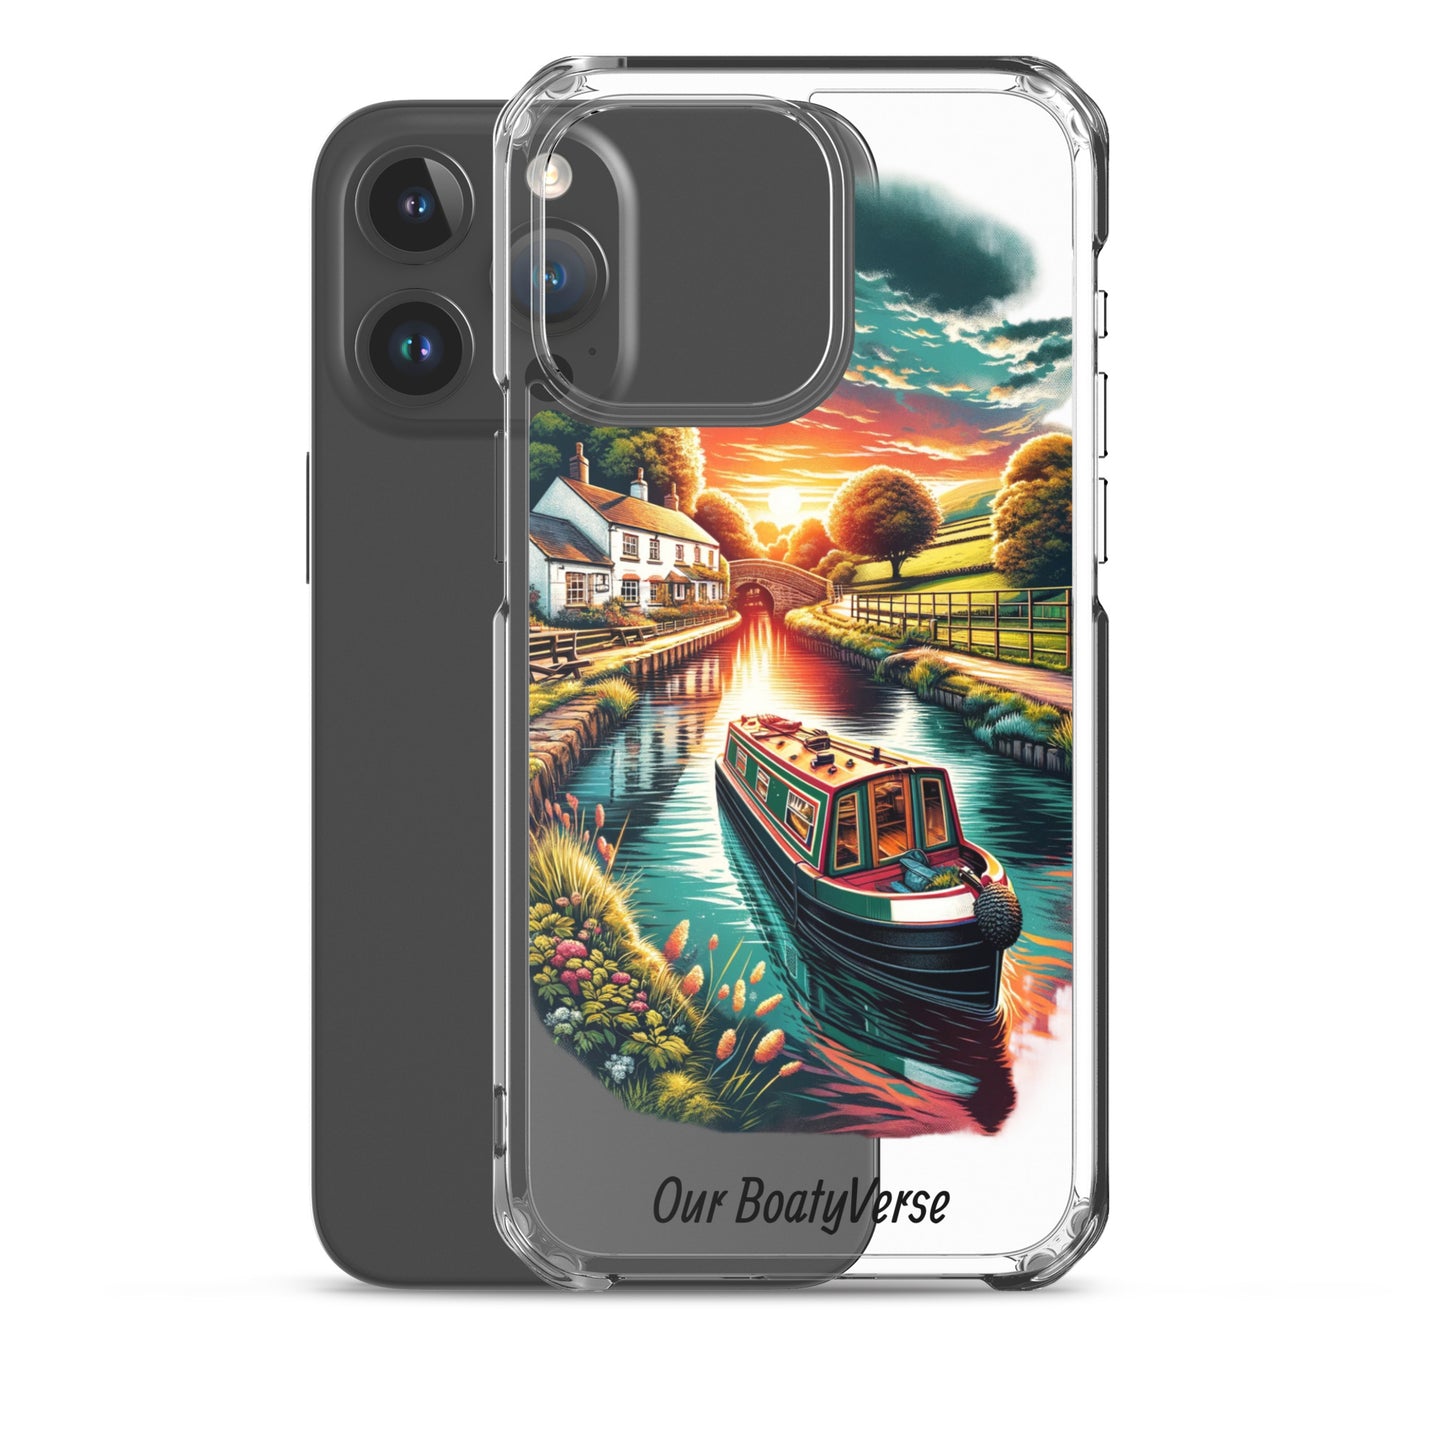 Narrowboat Dreams, Clear Case for iPhone® models by Our BoatyVerse